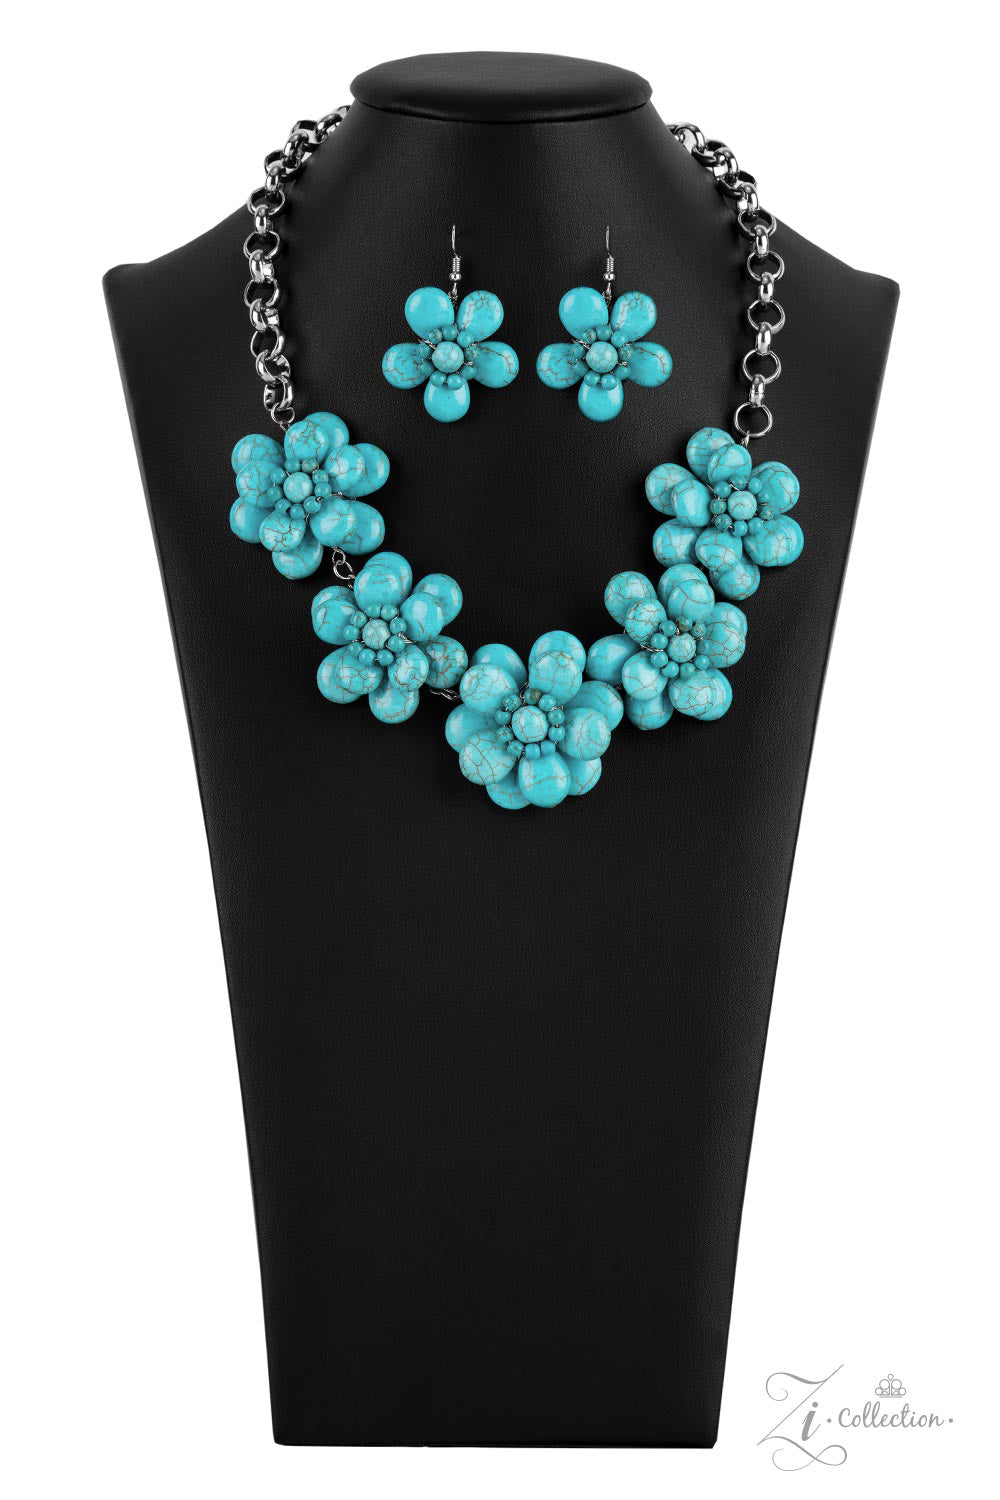 Genuine - Turquoise Stone Petal 2021 Zi Collection Necklaces dainty silver wire delicately wraps around earthy turquoise stone teardrop petals that beautifully layer into bountiful blossoms. Featuring turquoise stone beaded centers, the harmonious stone flowers gracefully connect to a substantial silver chain for an authentically artisan look below the collar. Features an adjustable clasp closure.  Sold as one individual necklace. Includes one pair of matching earrings.